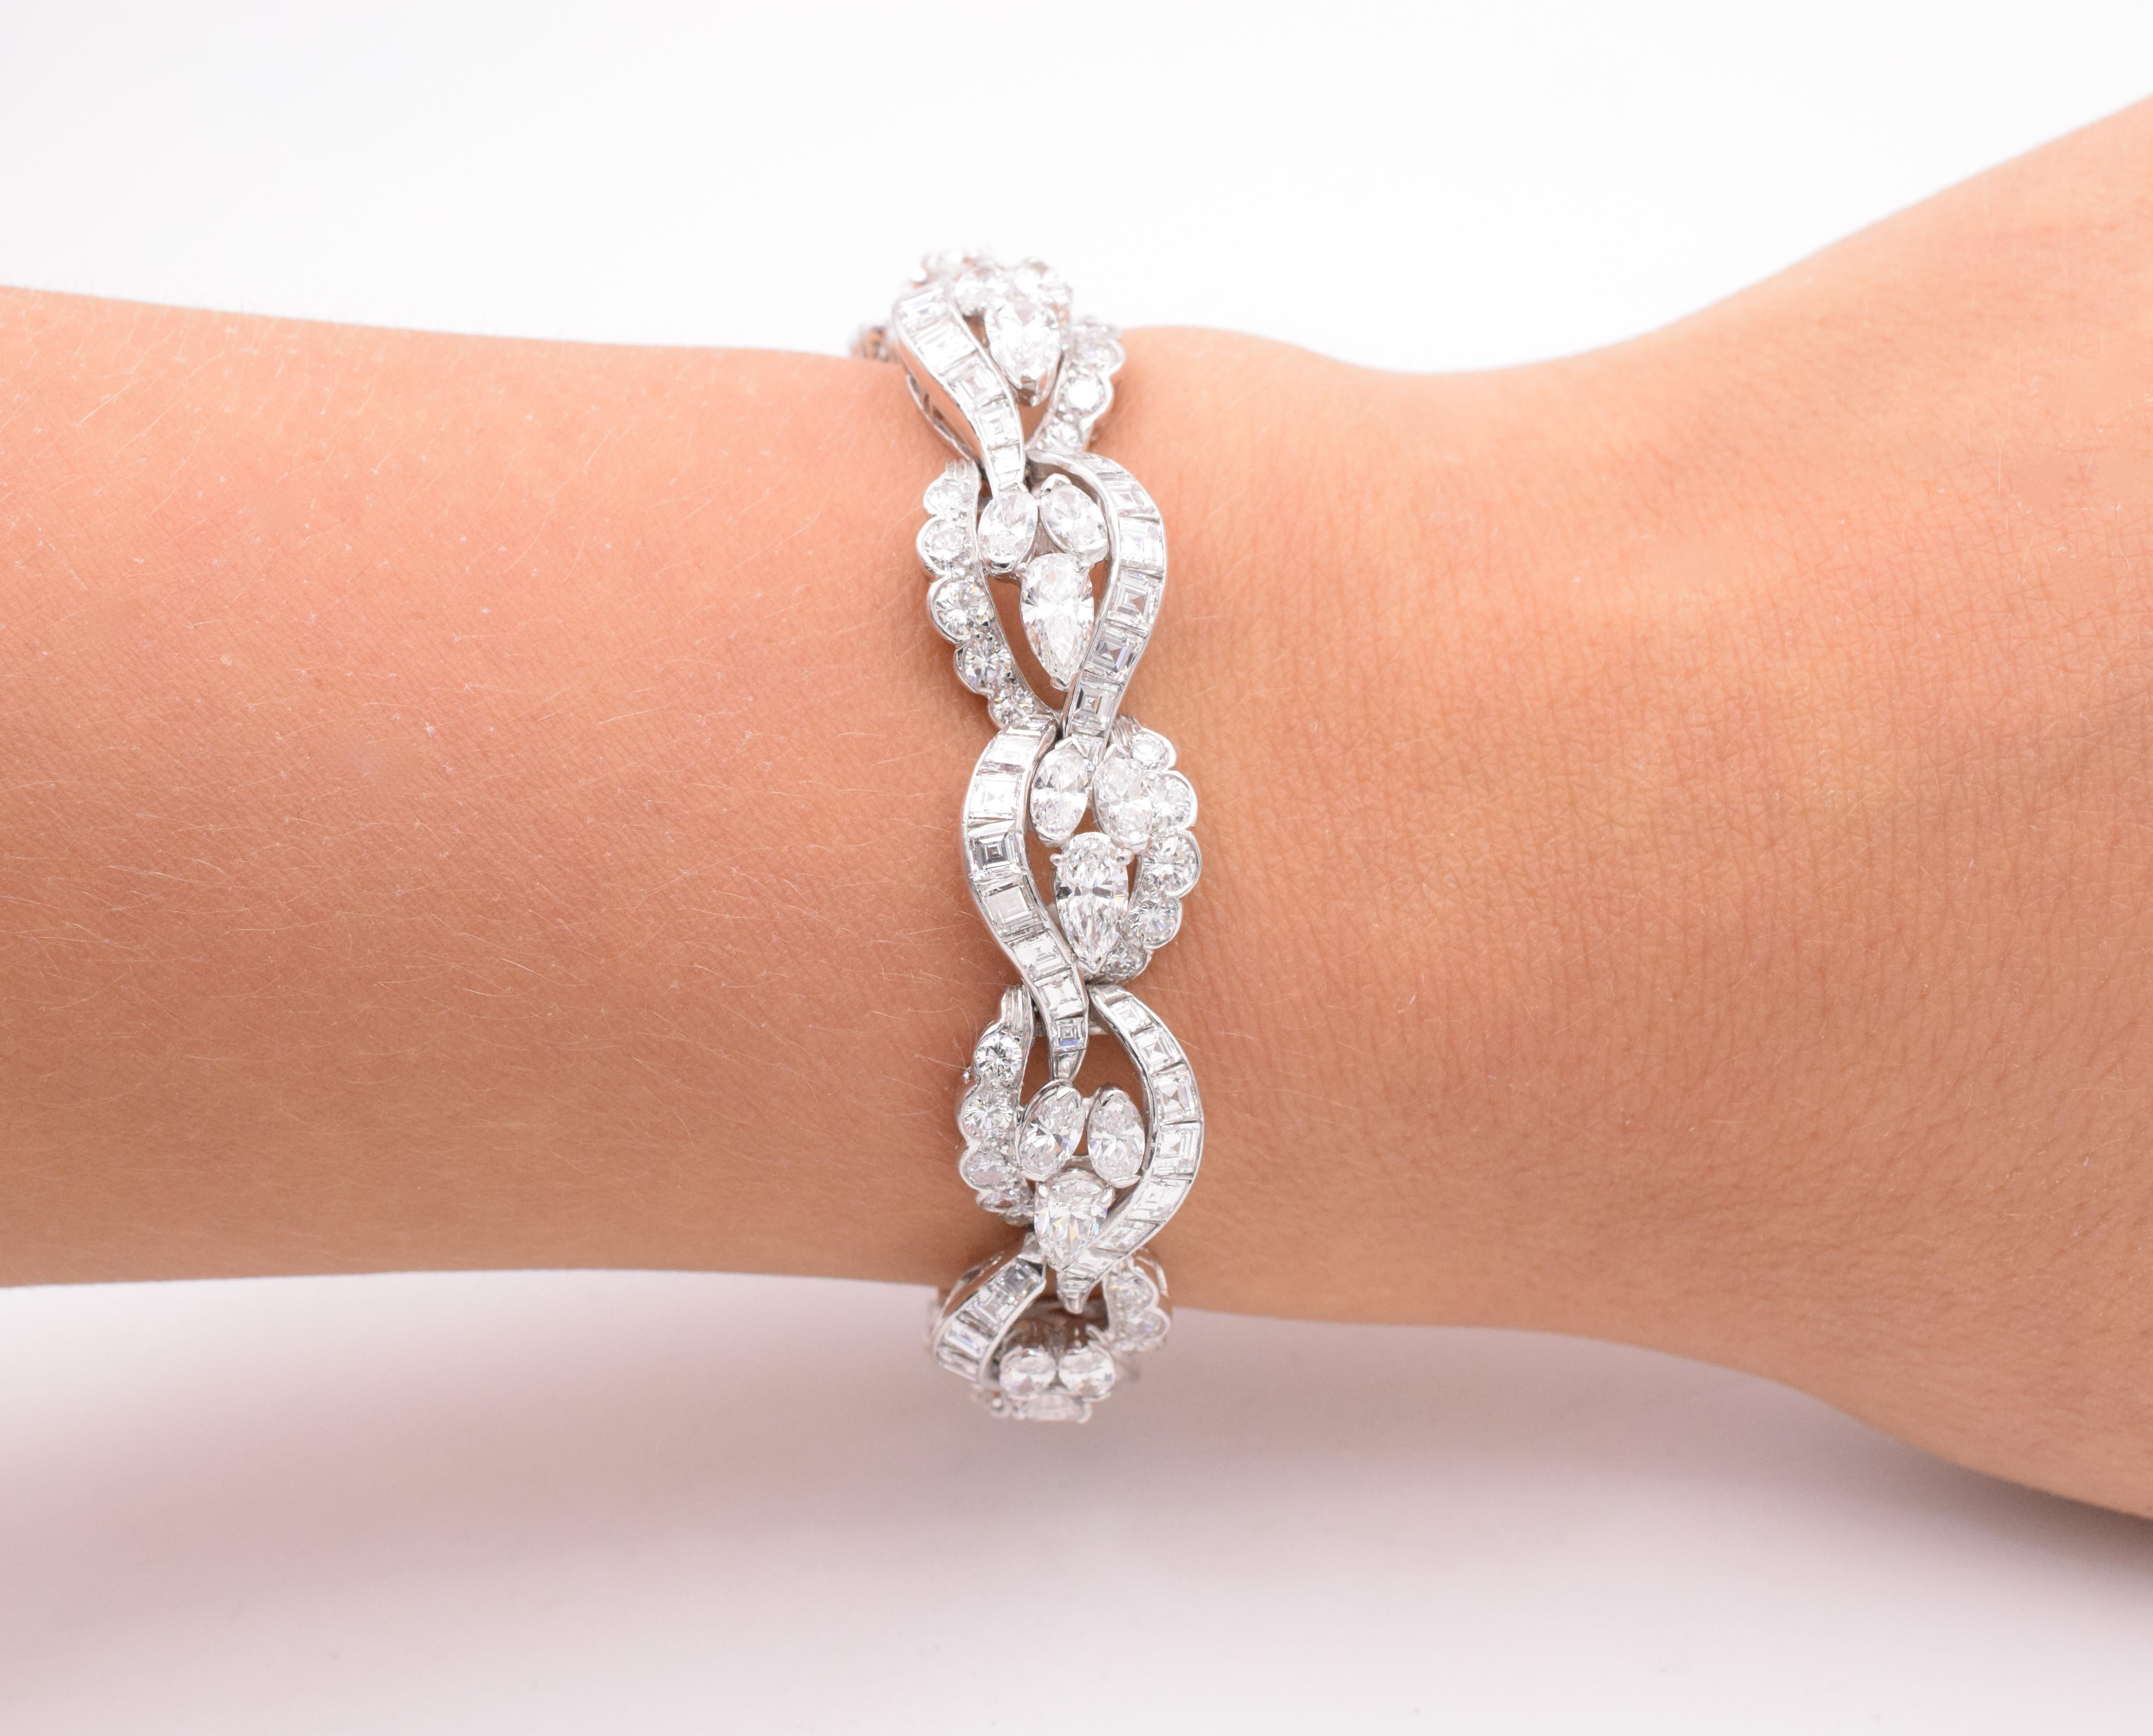 Oscar Heyman & Brothers Diamond Bracelet This bracelet has circular, pear, marquise, baguette and tapered baguette- cut diamonds all set in platinum. circa 1960, Length: 6.5 inches Weight: XX g. Comes with a Oscar Heyman Certificate of Authenticity